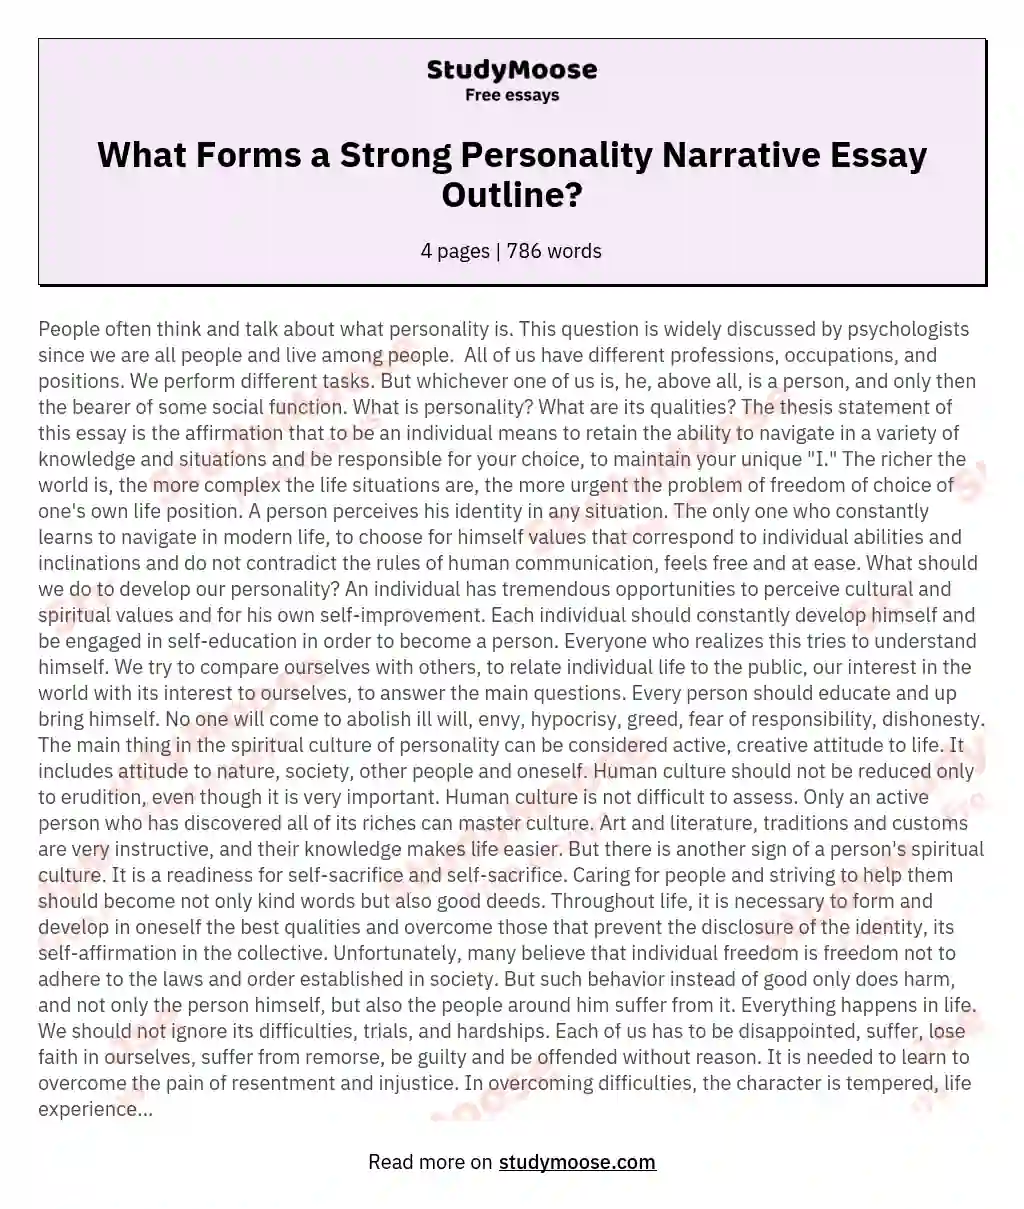 What Forms a Strong Personality Narrative Essay Outline? essay